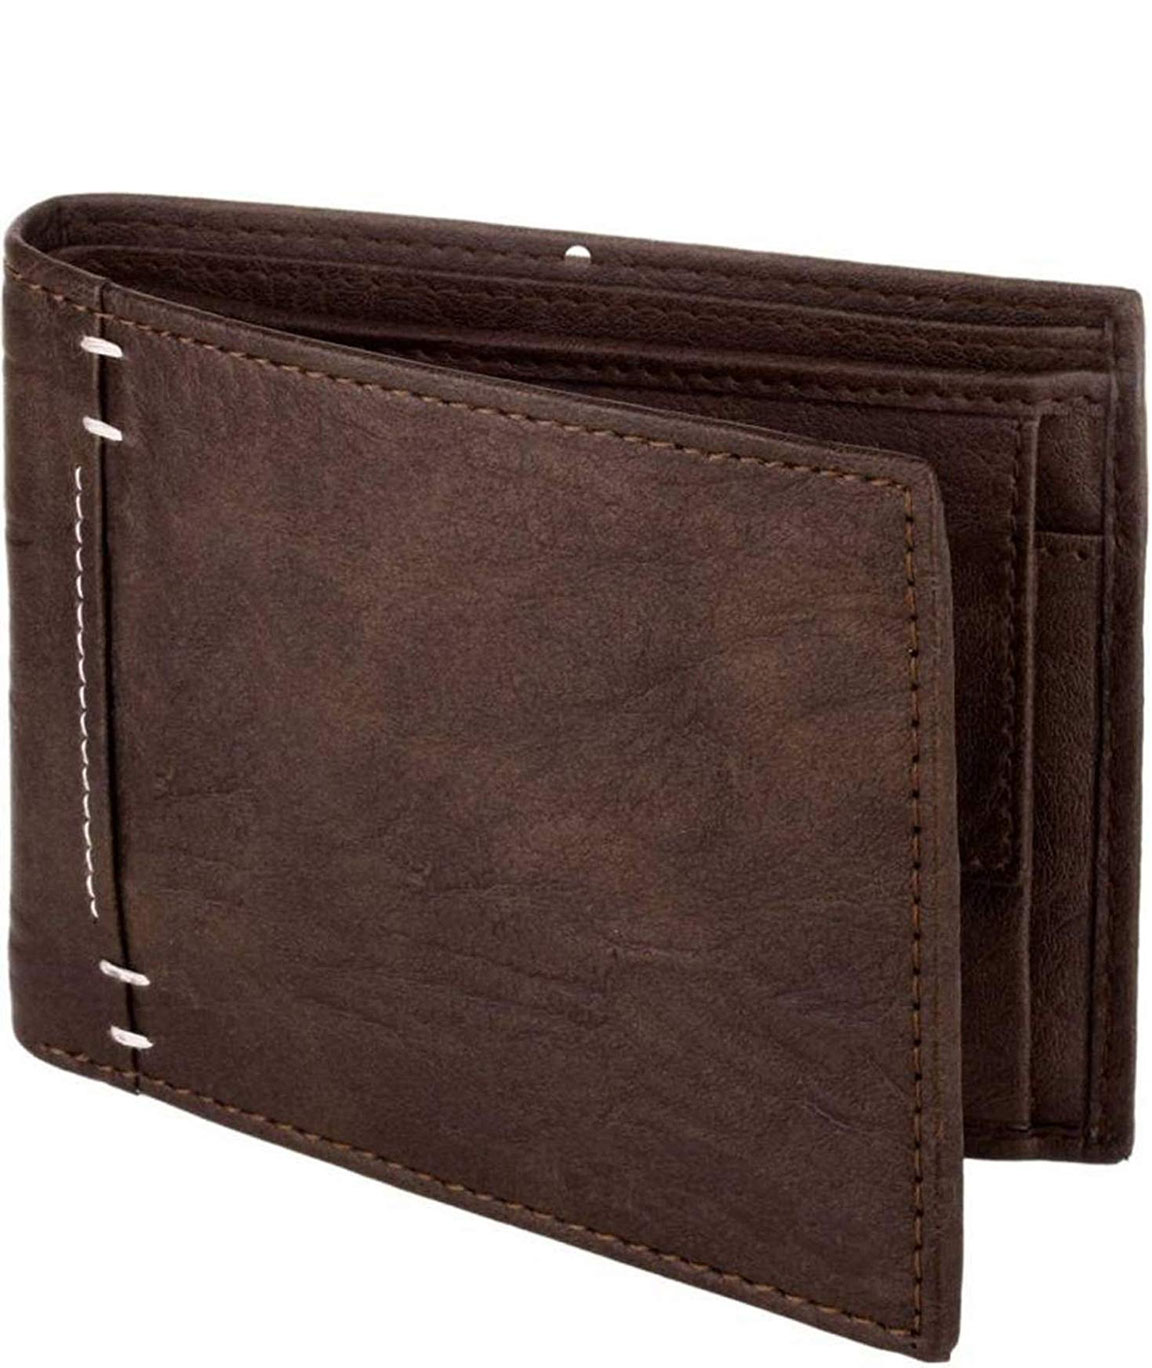 Handy Mens Gents Leather Coin Tray Change Holder Wallet Purse in 3 Colours  | eBay